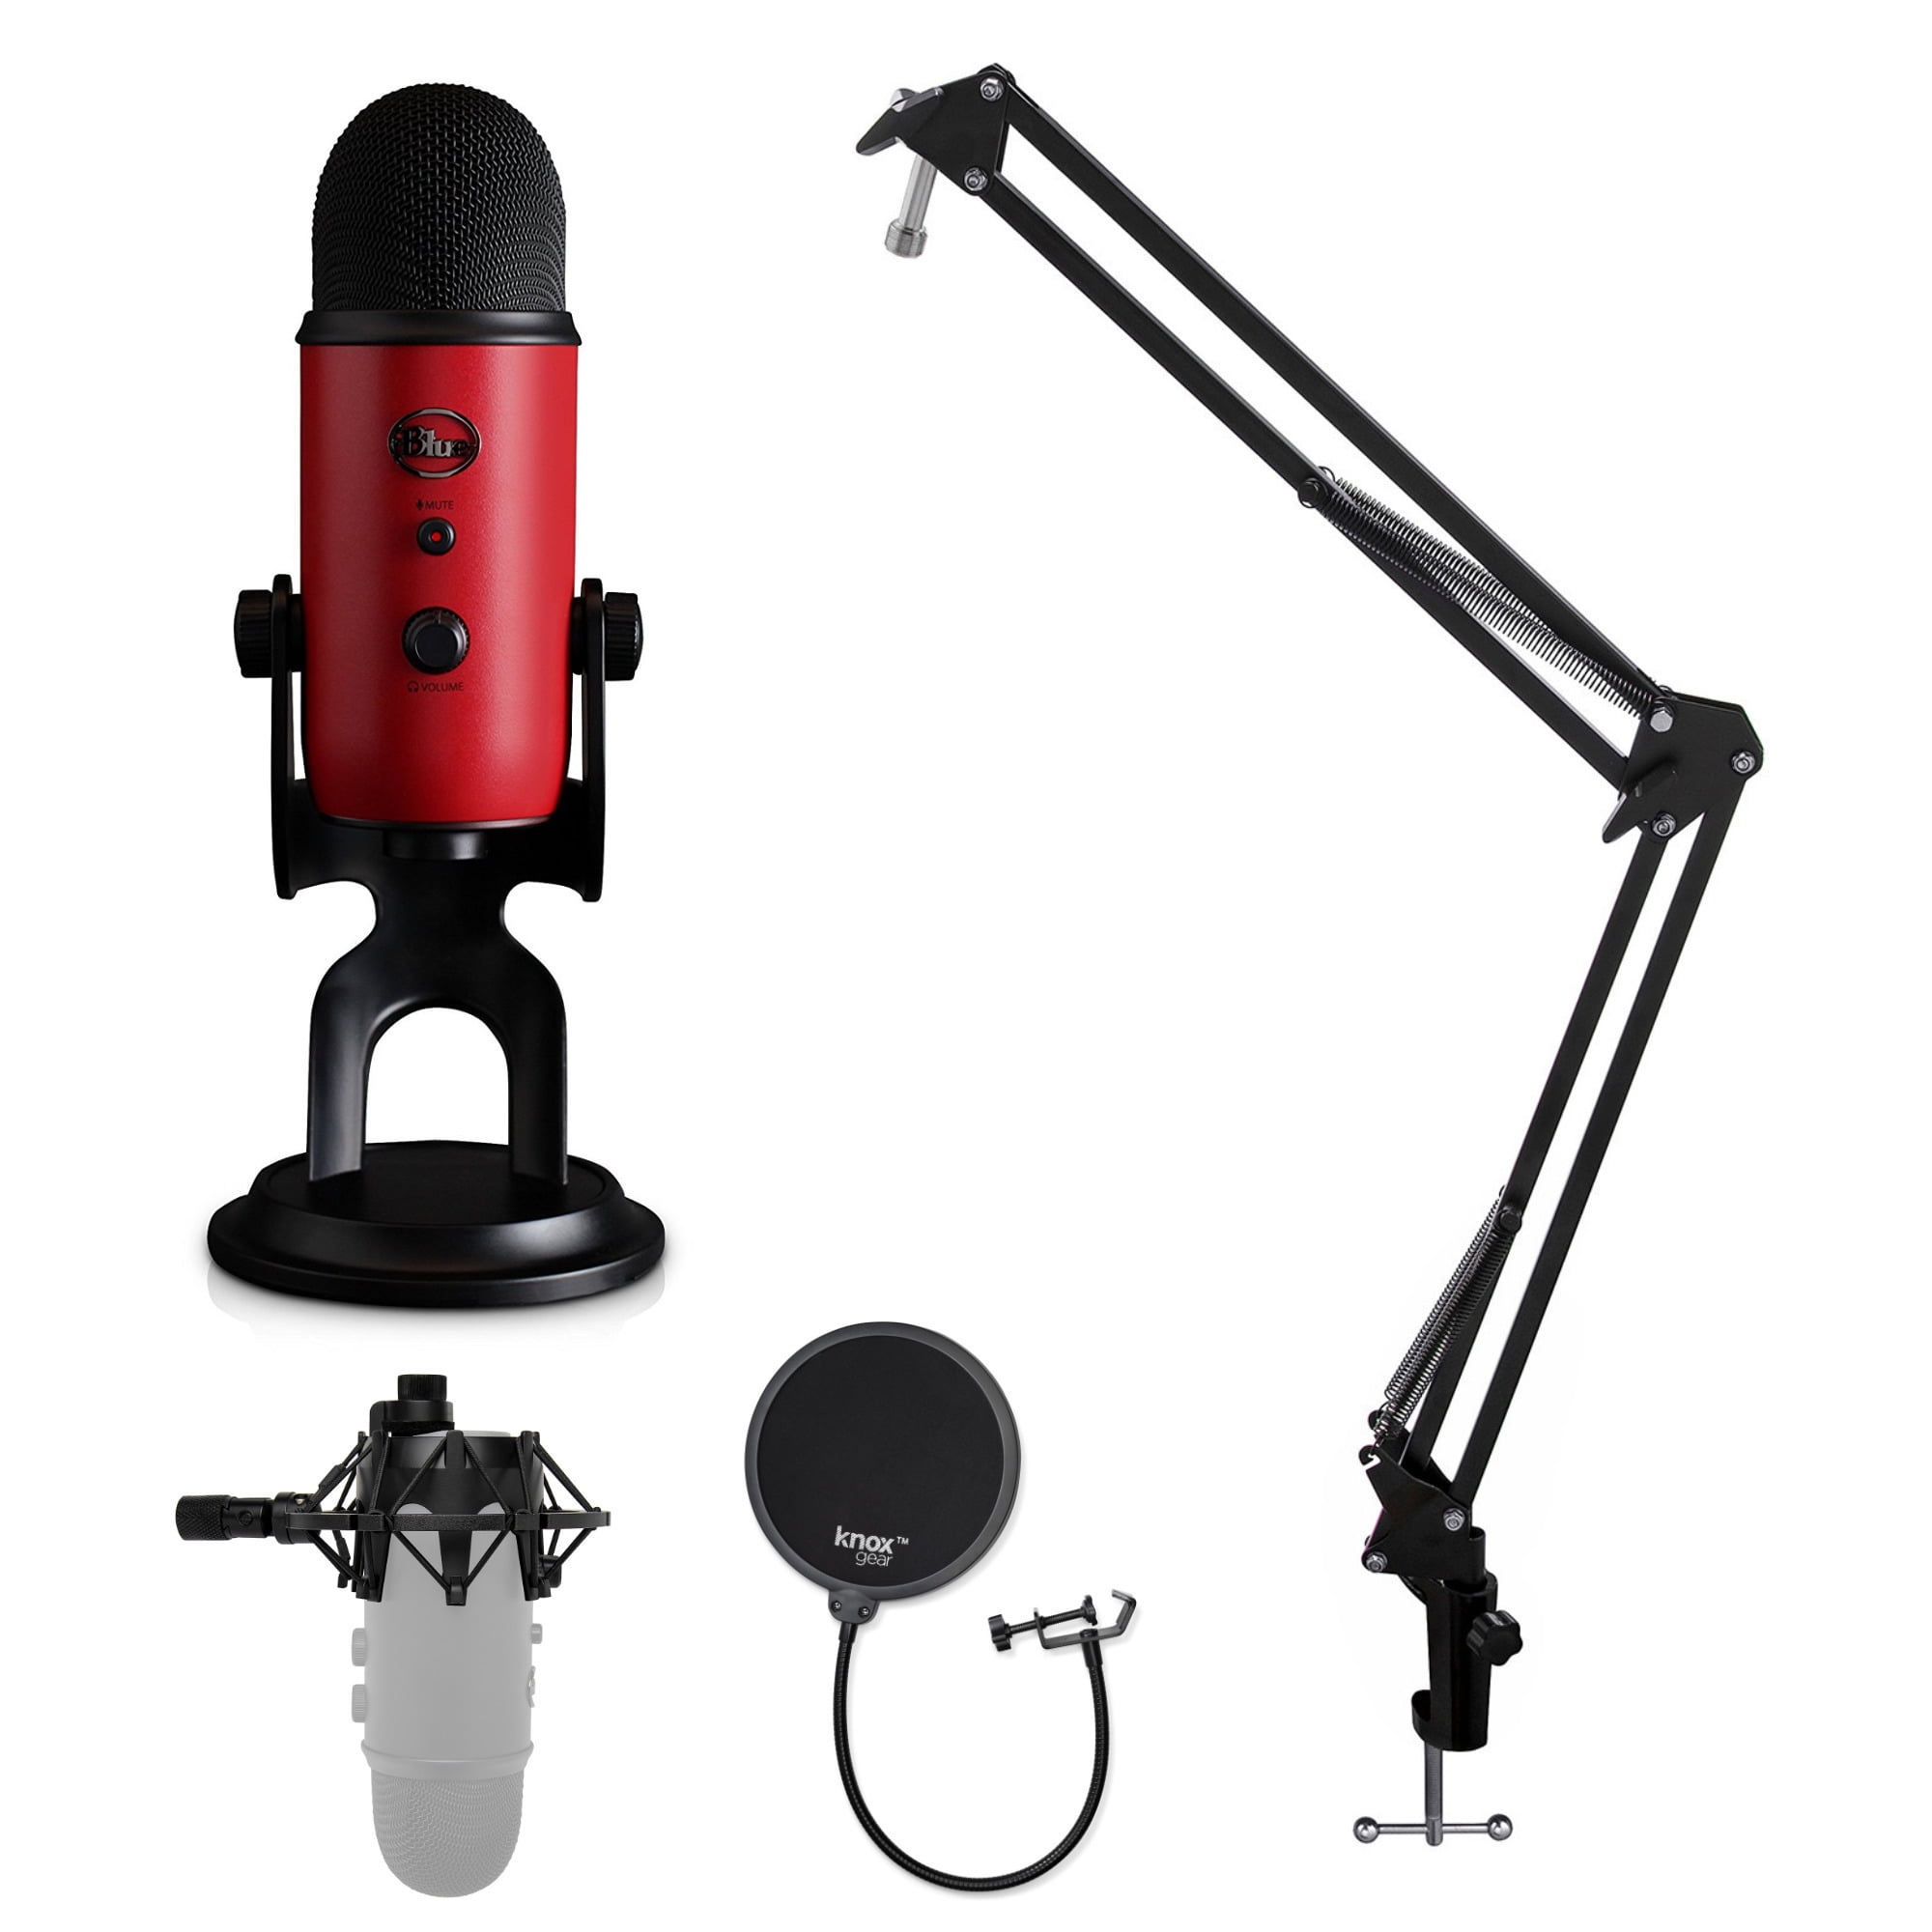 Blue Microphone Yeti Usb Microphone With Knox Shock Mount Stand And Pop Filter Walmart Com Walmart Com